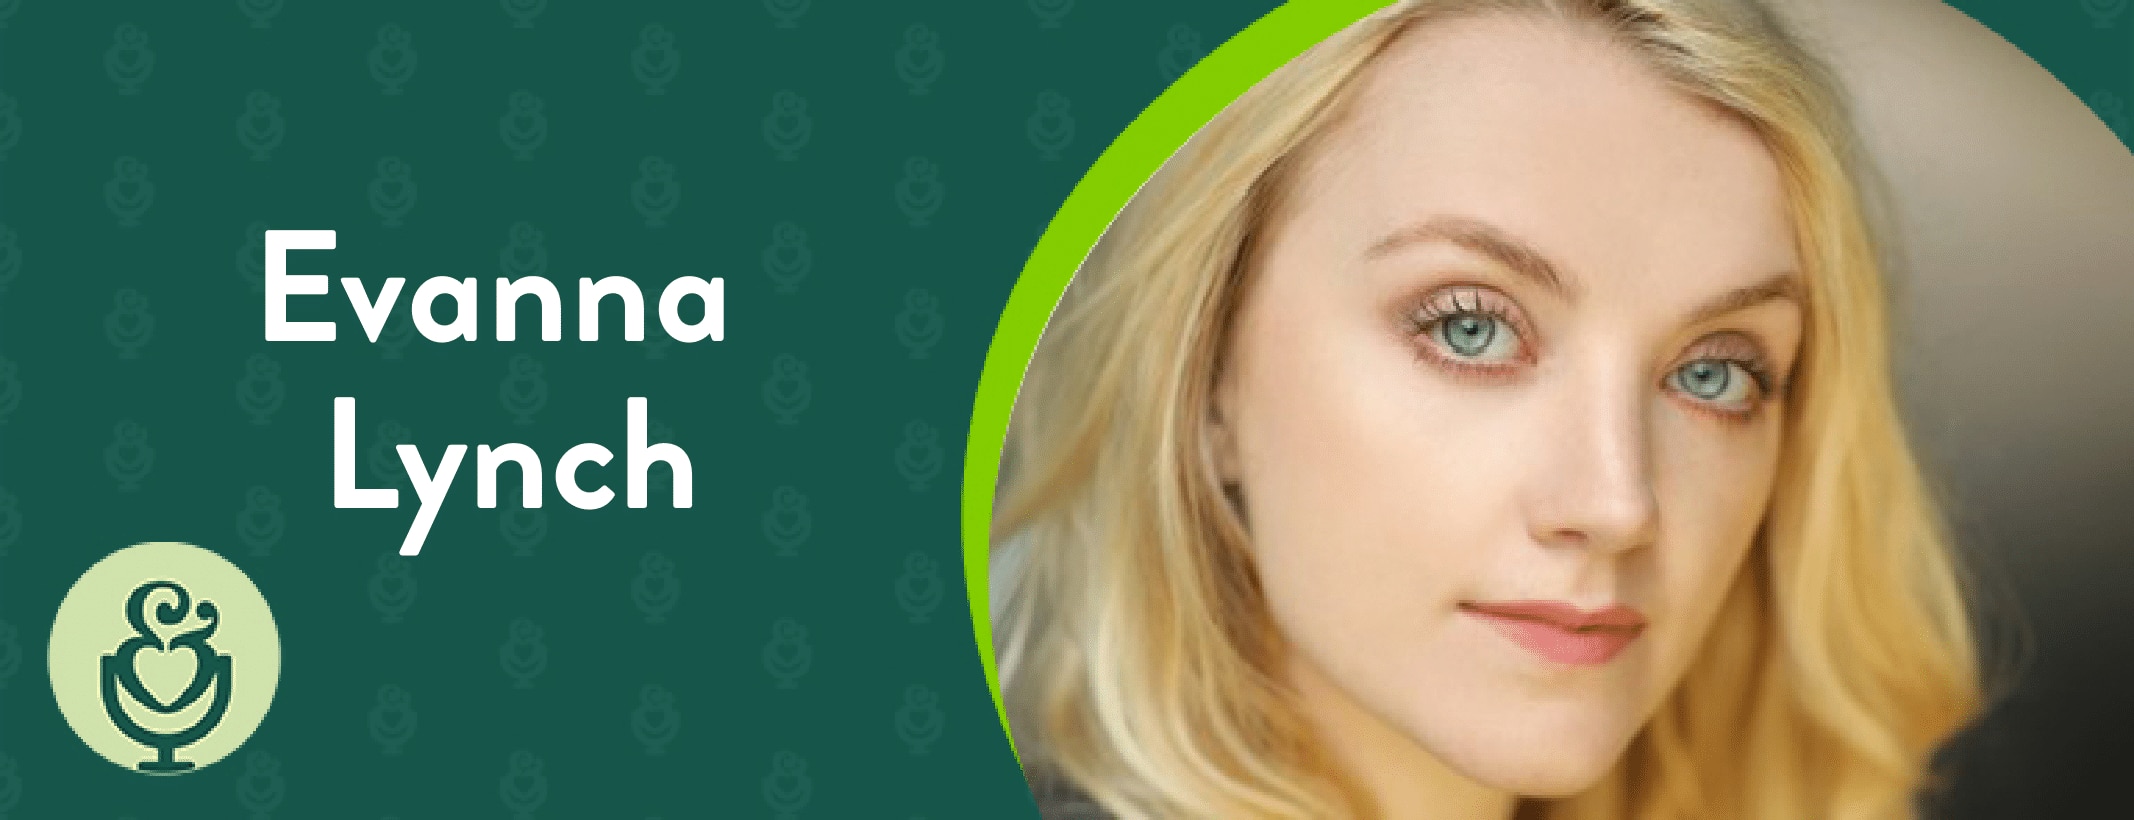 Evanna Lynch on how to love & accept yourself image